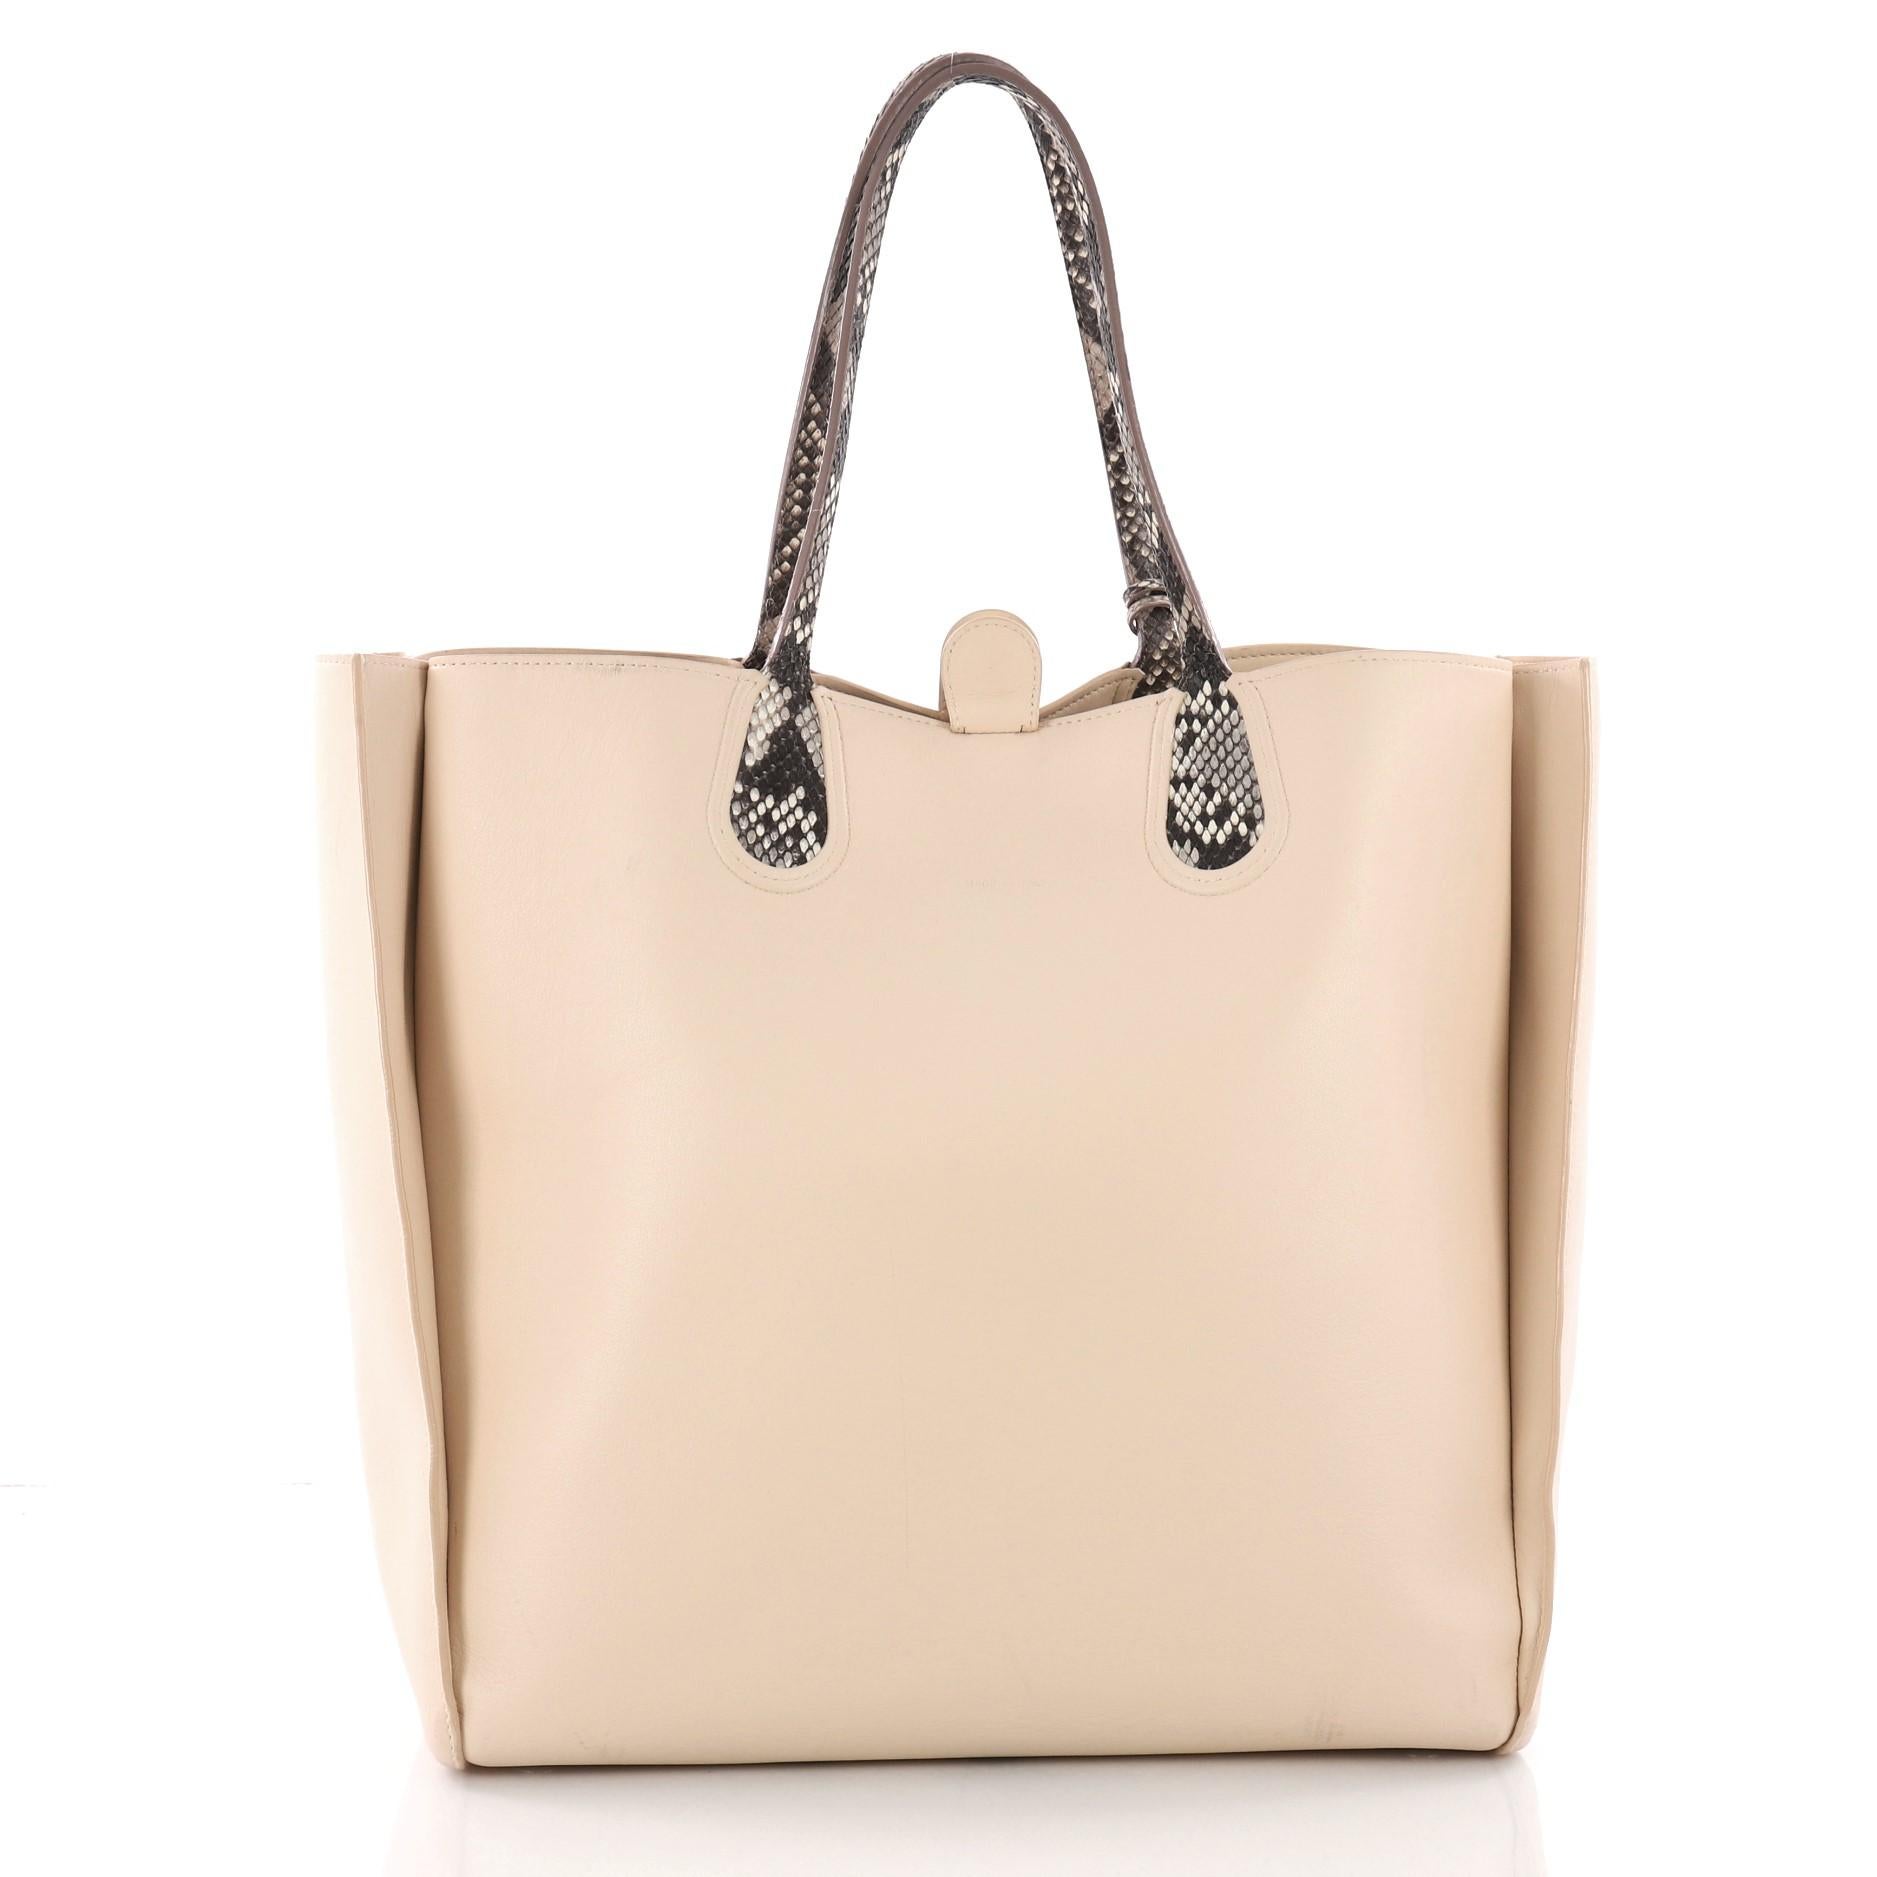 Beige Christian Dior Addict Shopping Tote Leather